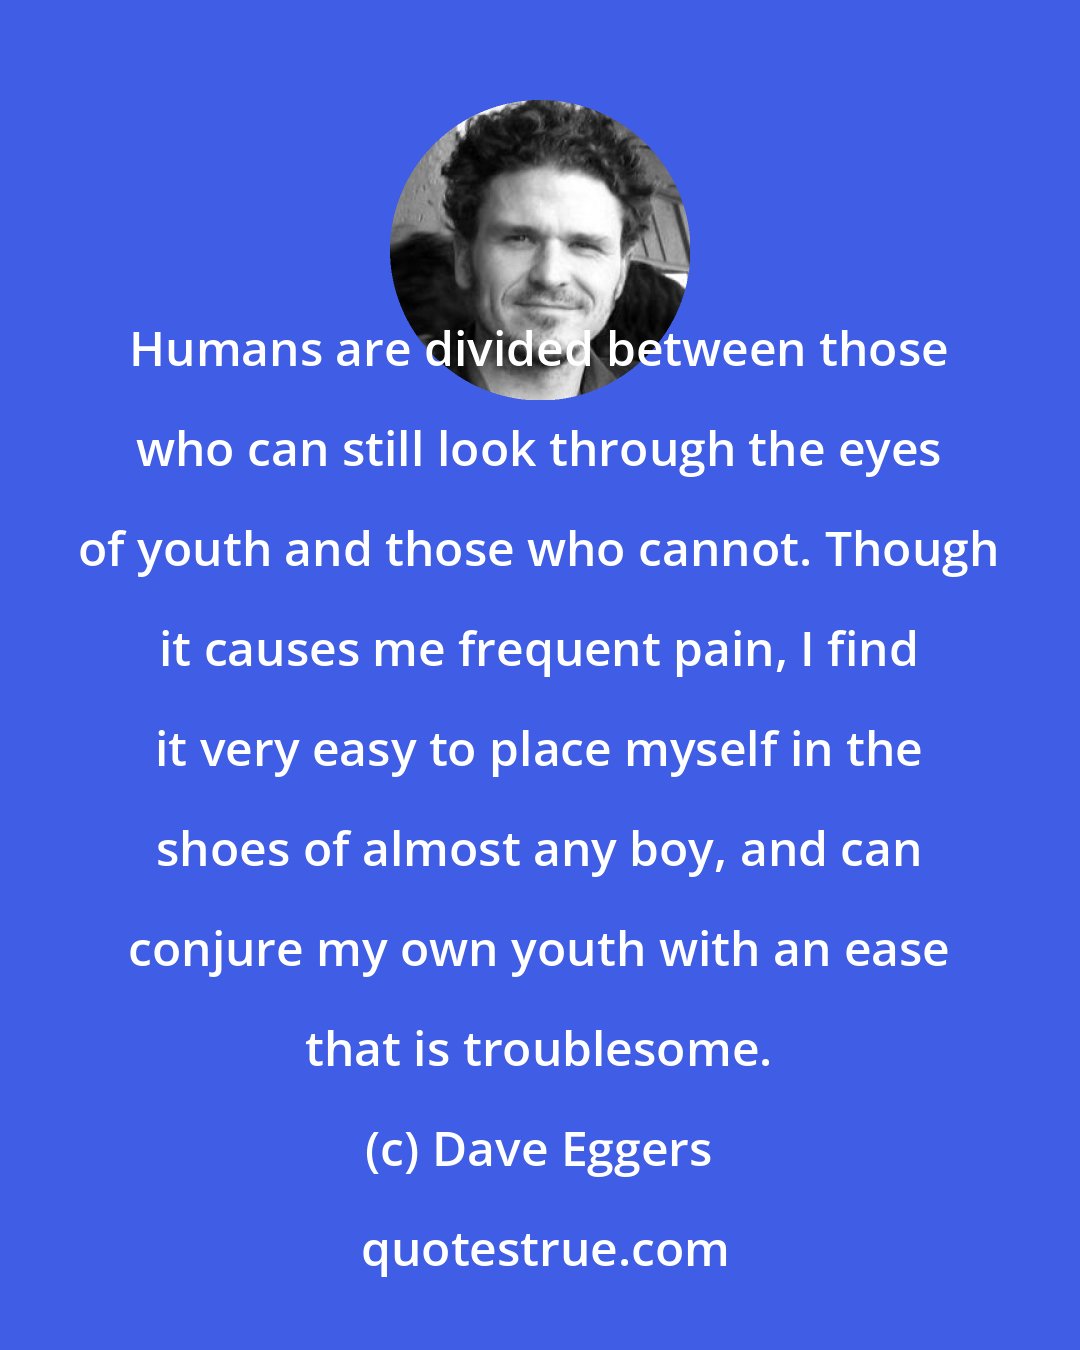 Dave Eggers: Humans are divided between those who can still look through the eyes of youth and those who cannot. Though it causes me frequent pain, I find it very easy to place myself in the shoes of almost any boy, and can conjure my own youth with an ease that is troublesome.